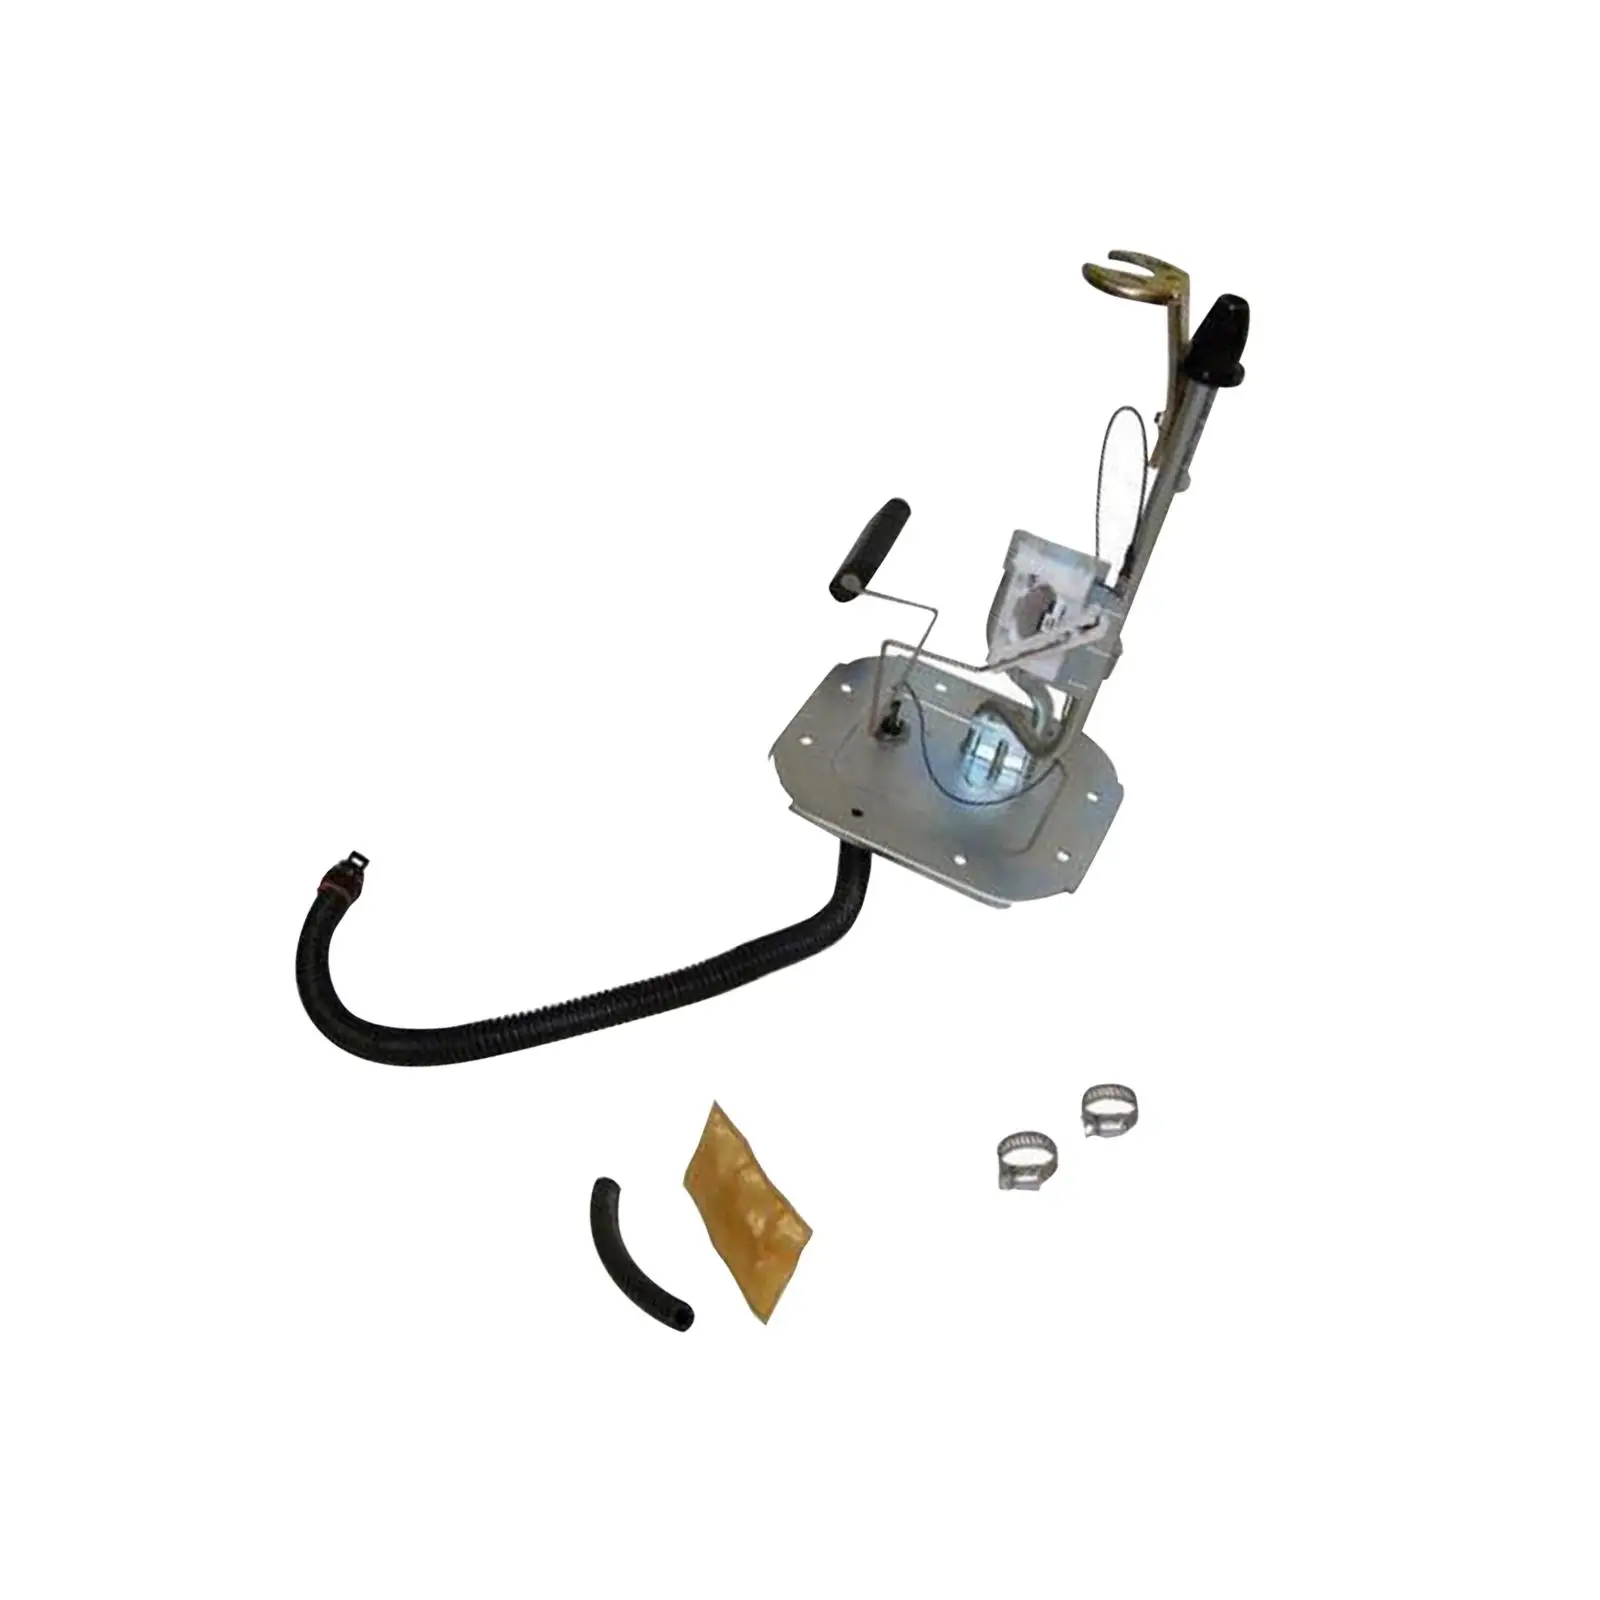 Fuel Level Sending Unit Replaces 53003341x Durable Assembly for Yj